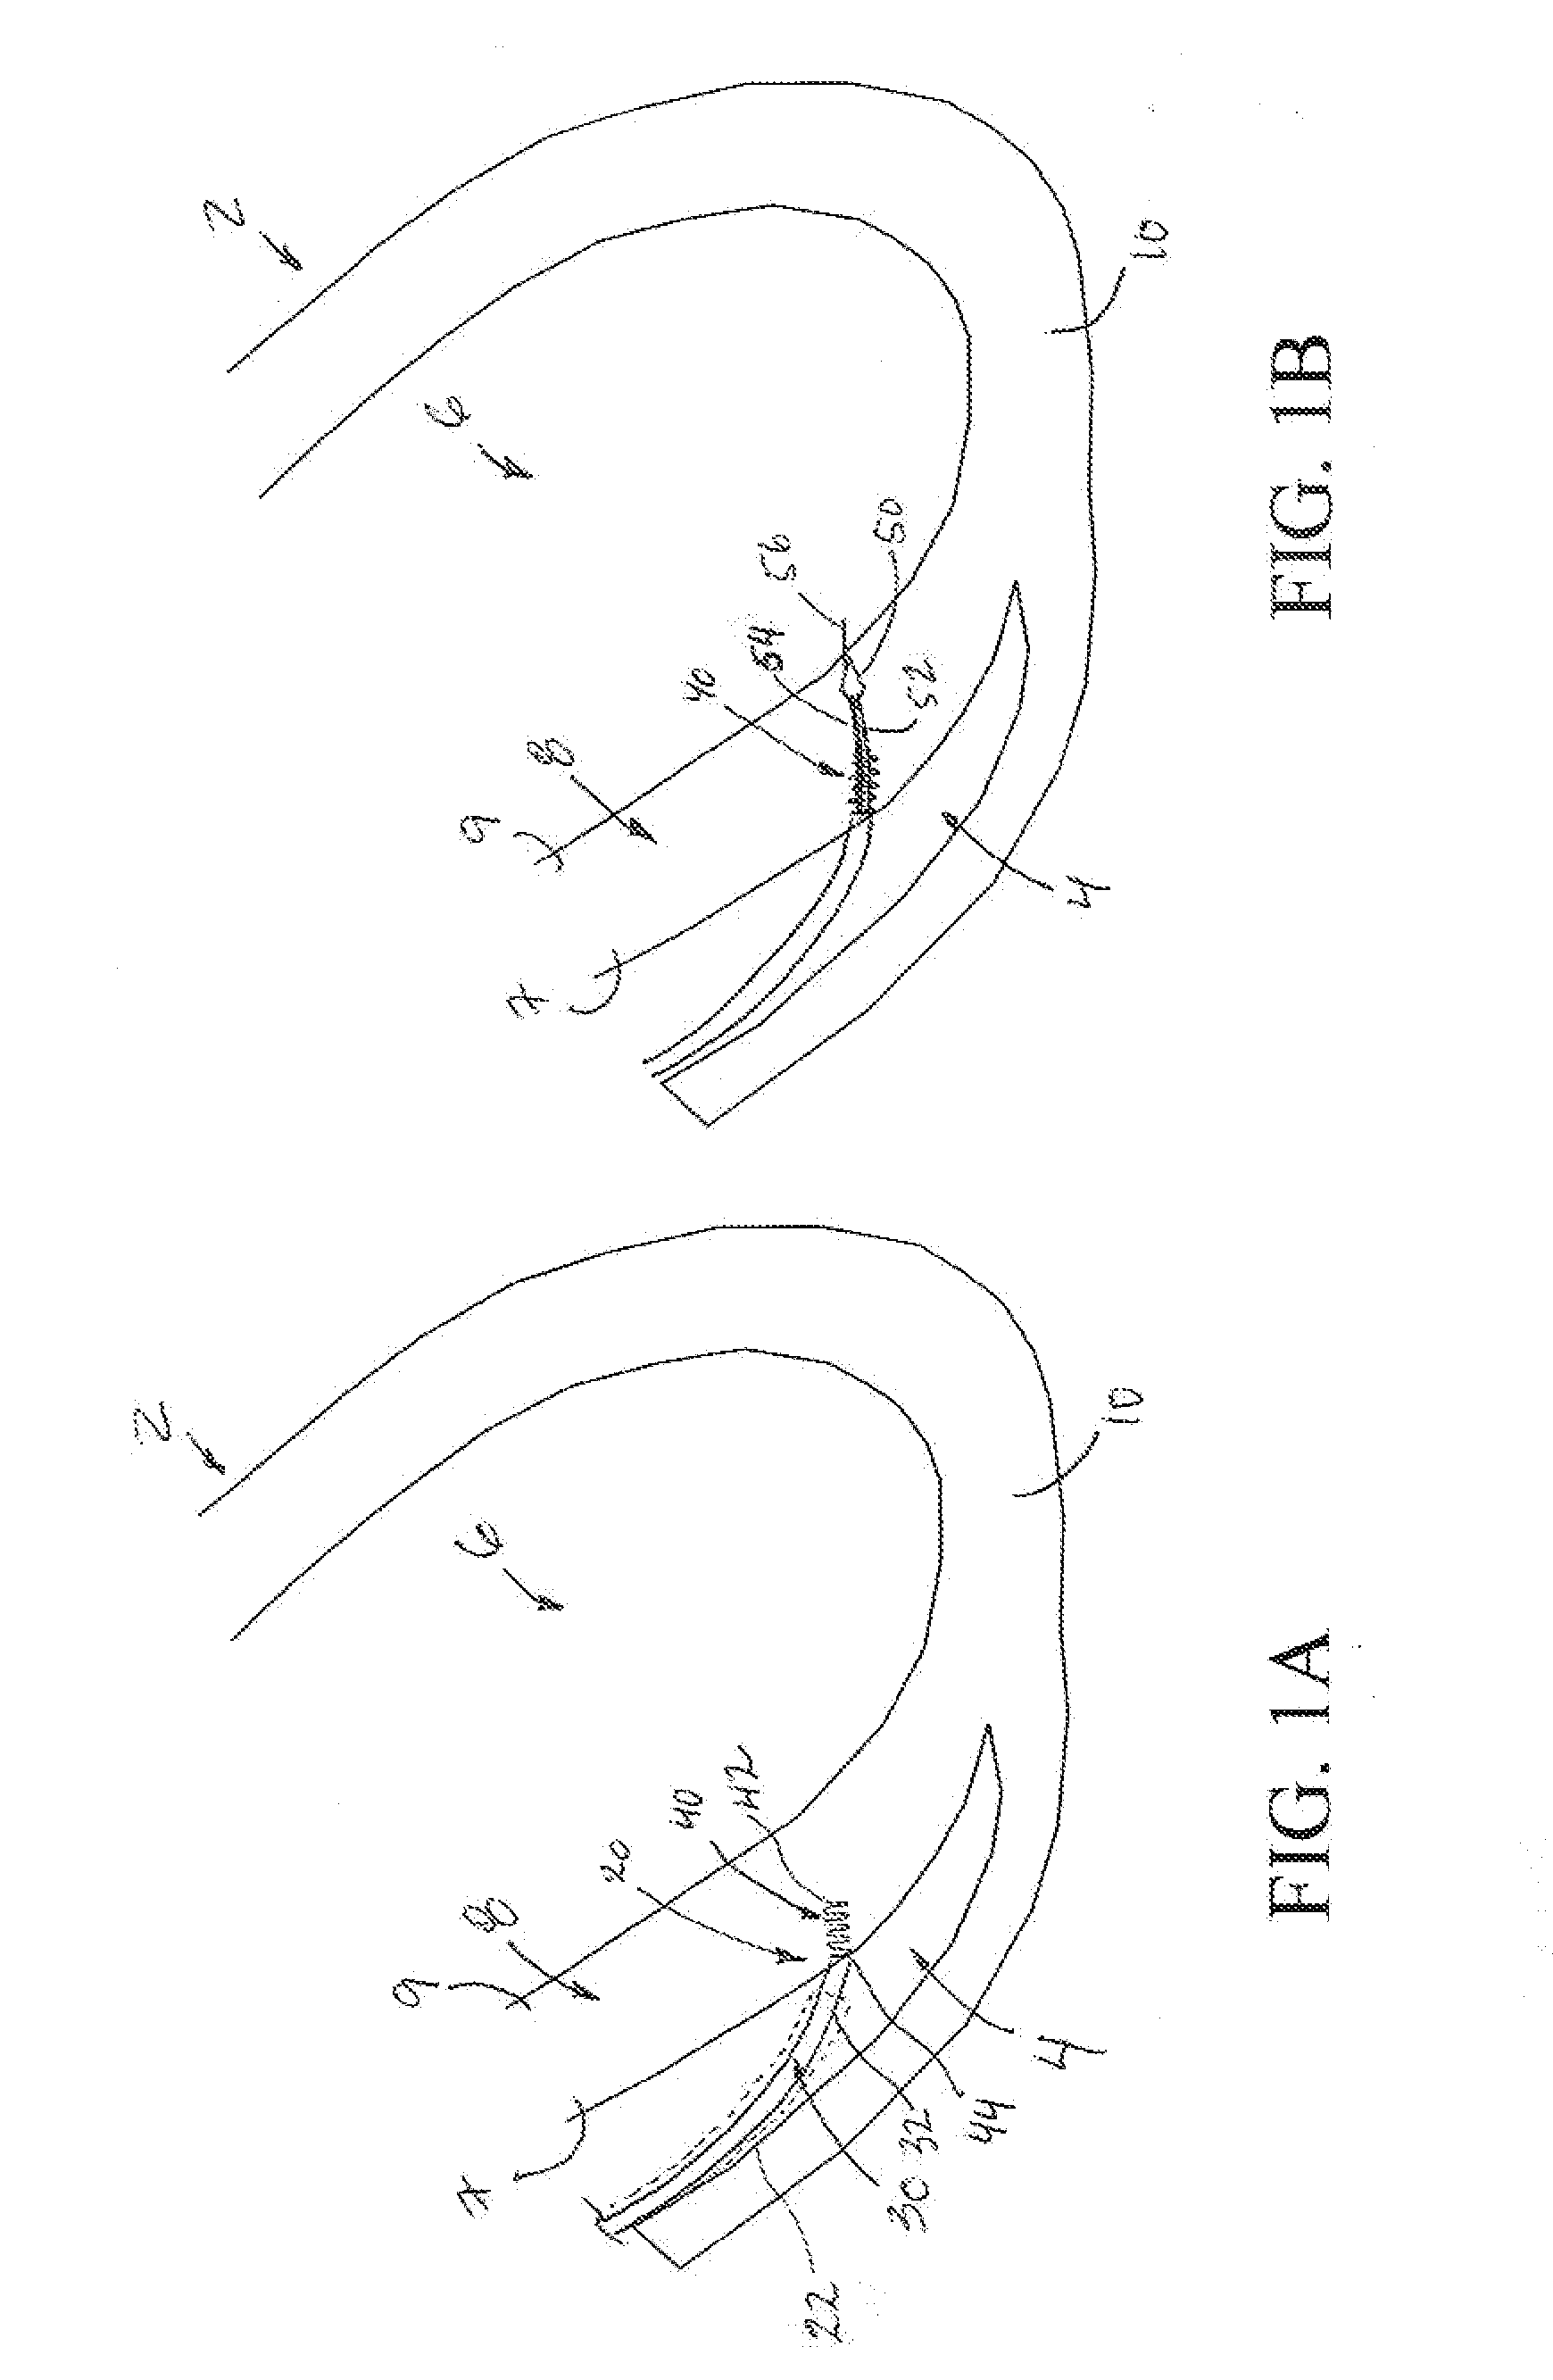 Transmuscular left ventricular cardiac stimulation leads and related systems and methods